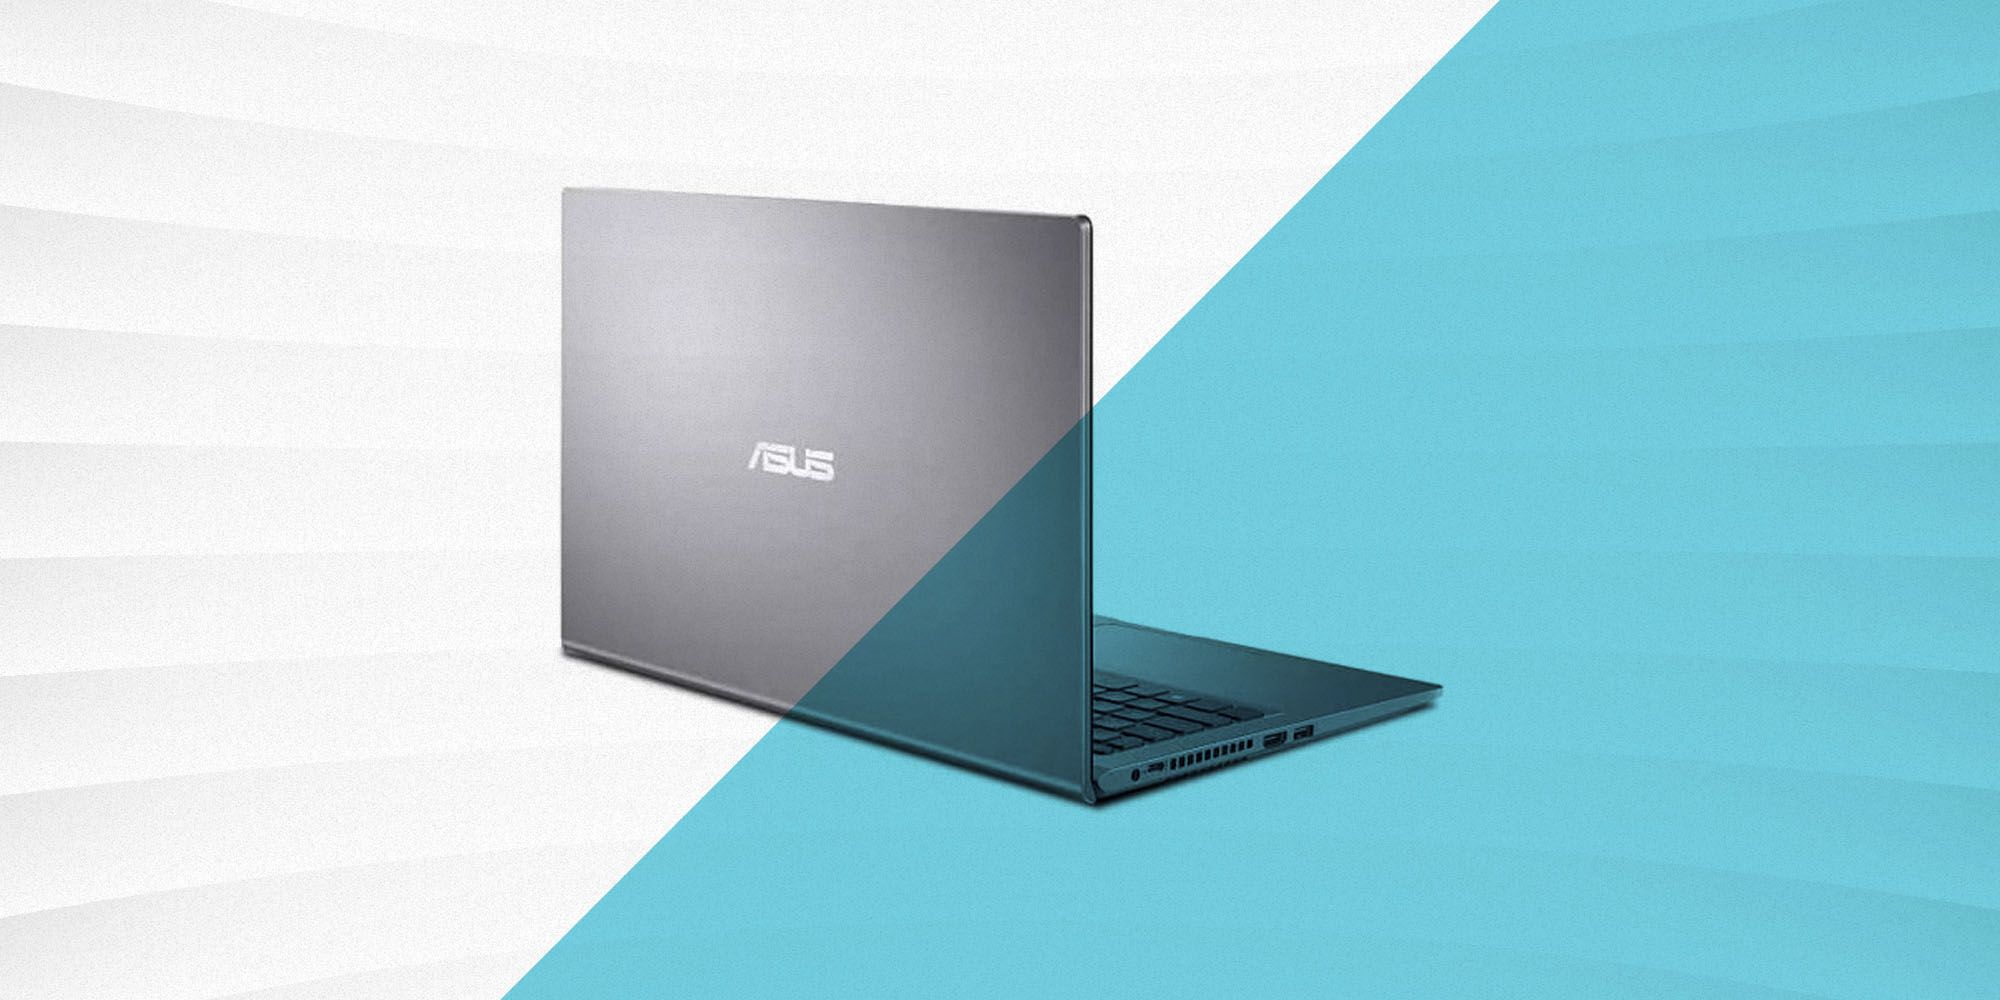 What Is The Best Gaming Laptop Under 500